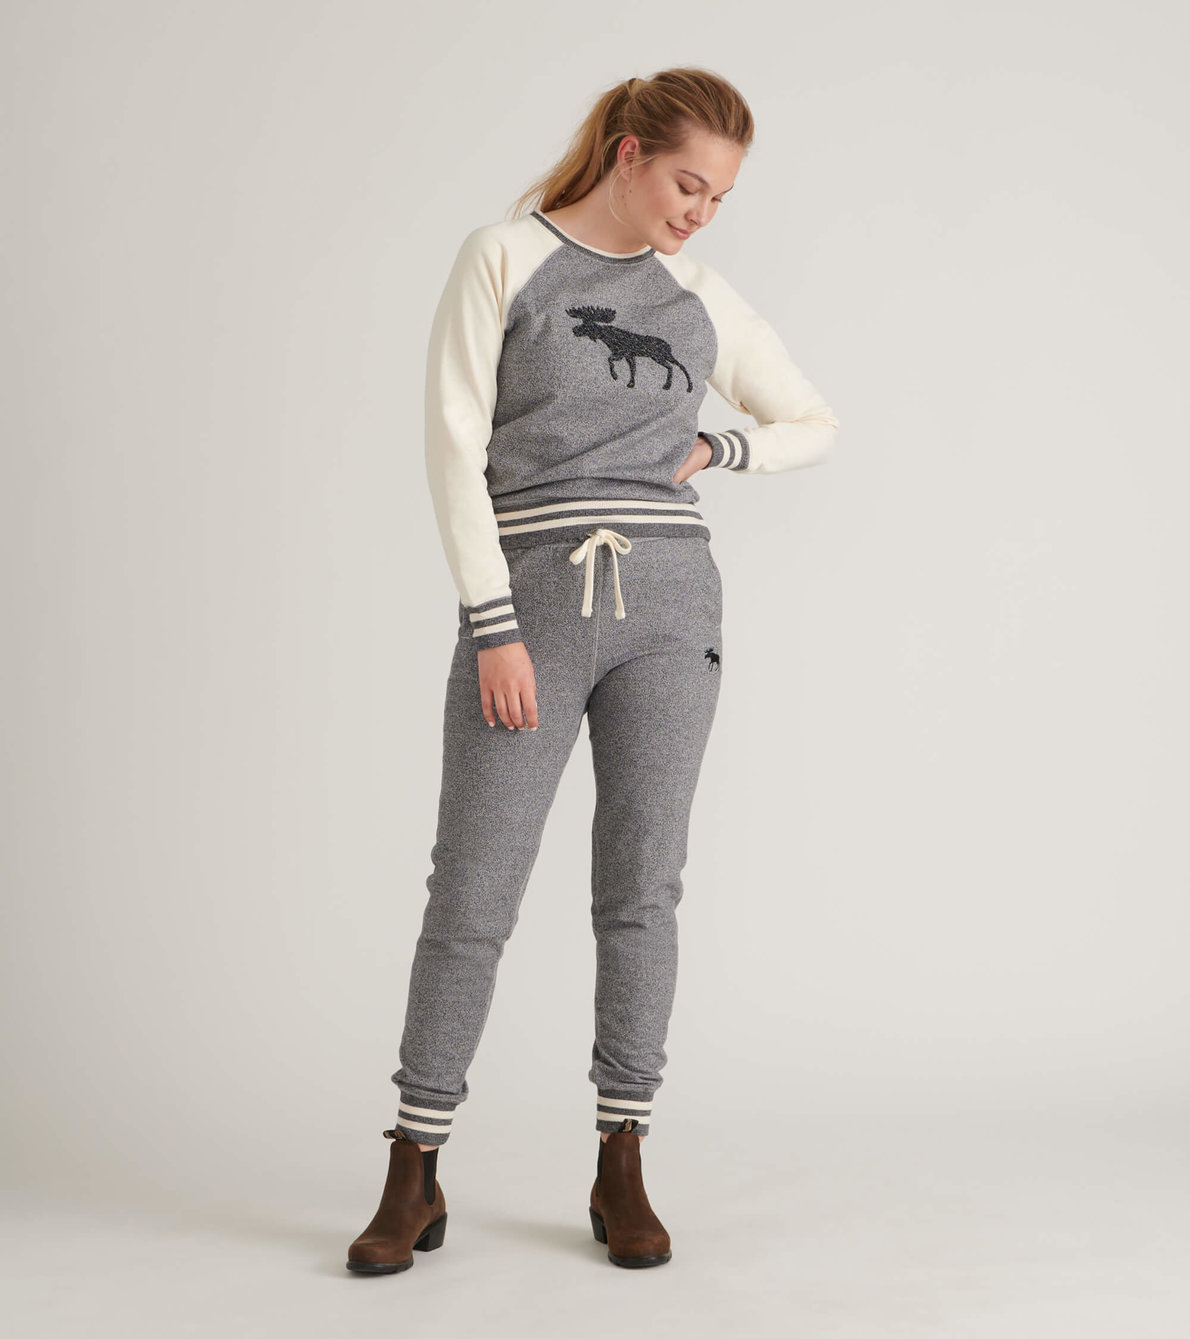 View larger image of Marled Grey Moose Women's Heritage Pullover